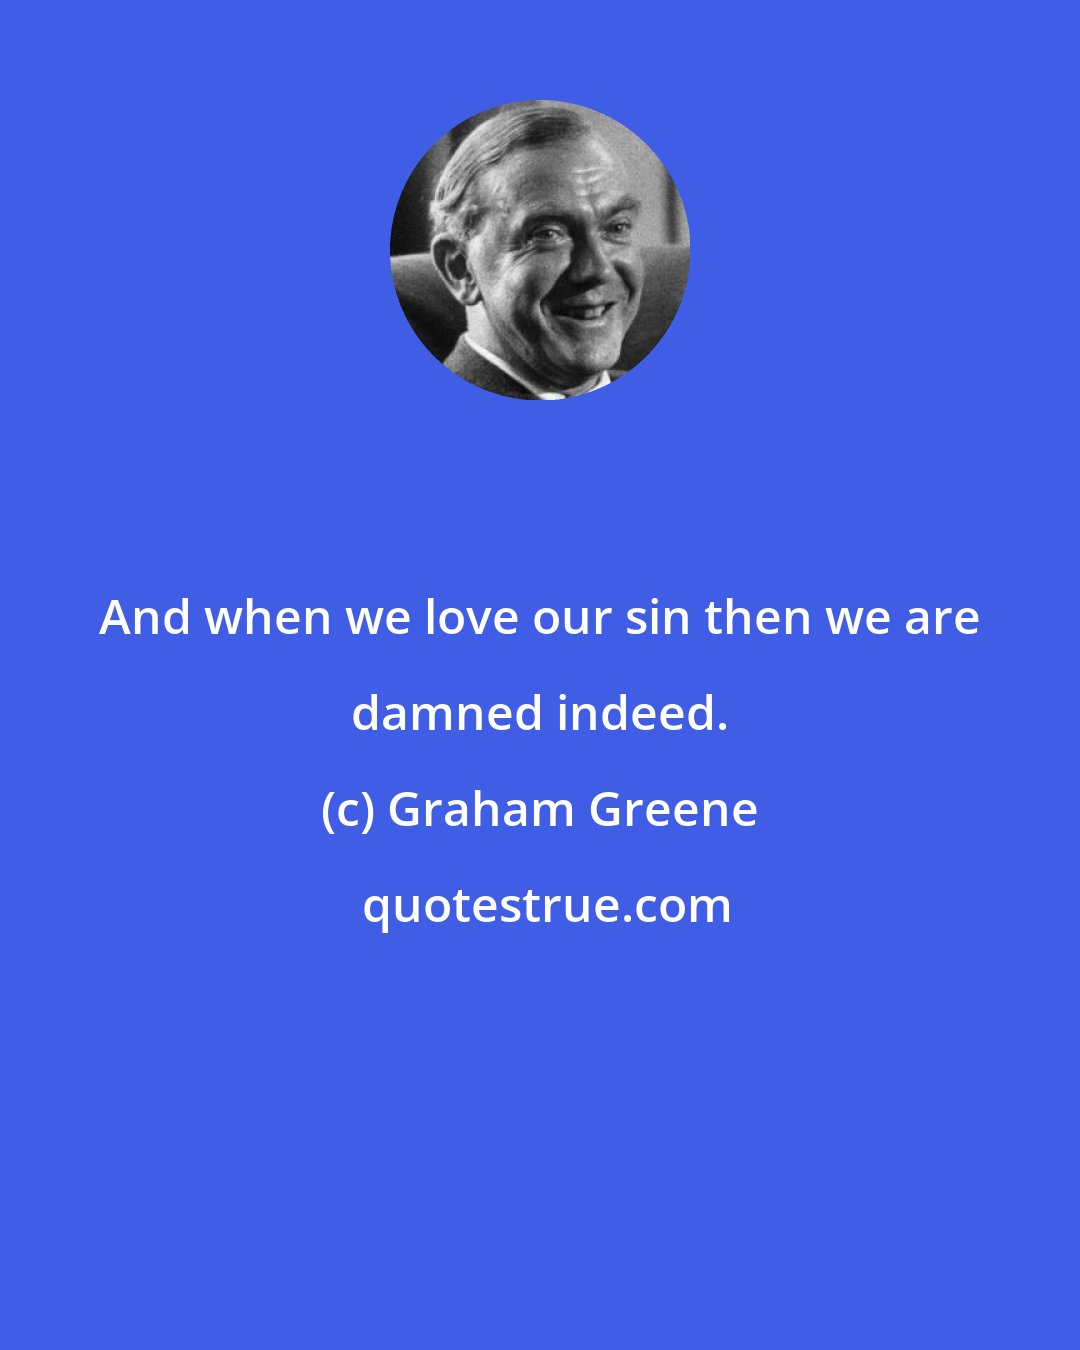 Graham Greene: And when we love our sin then we are damned indeed.